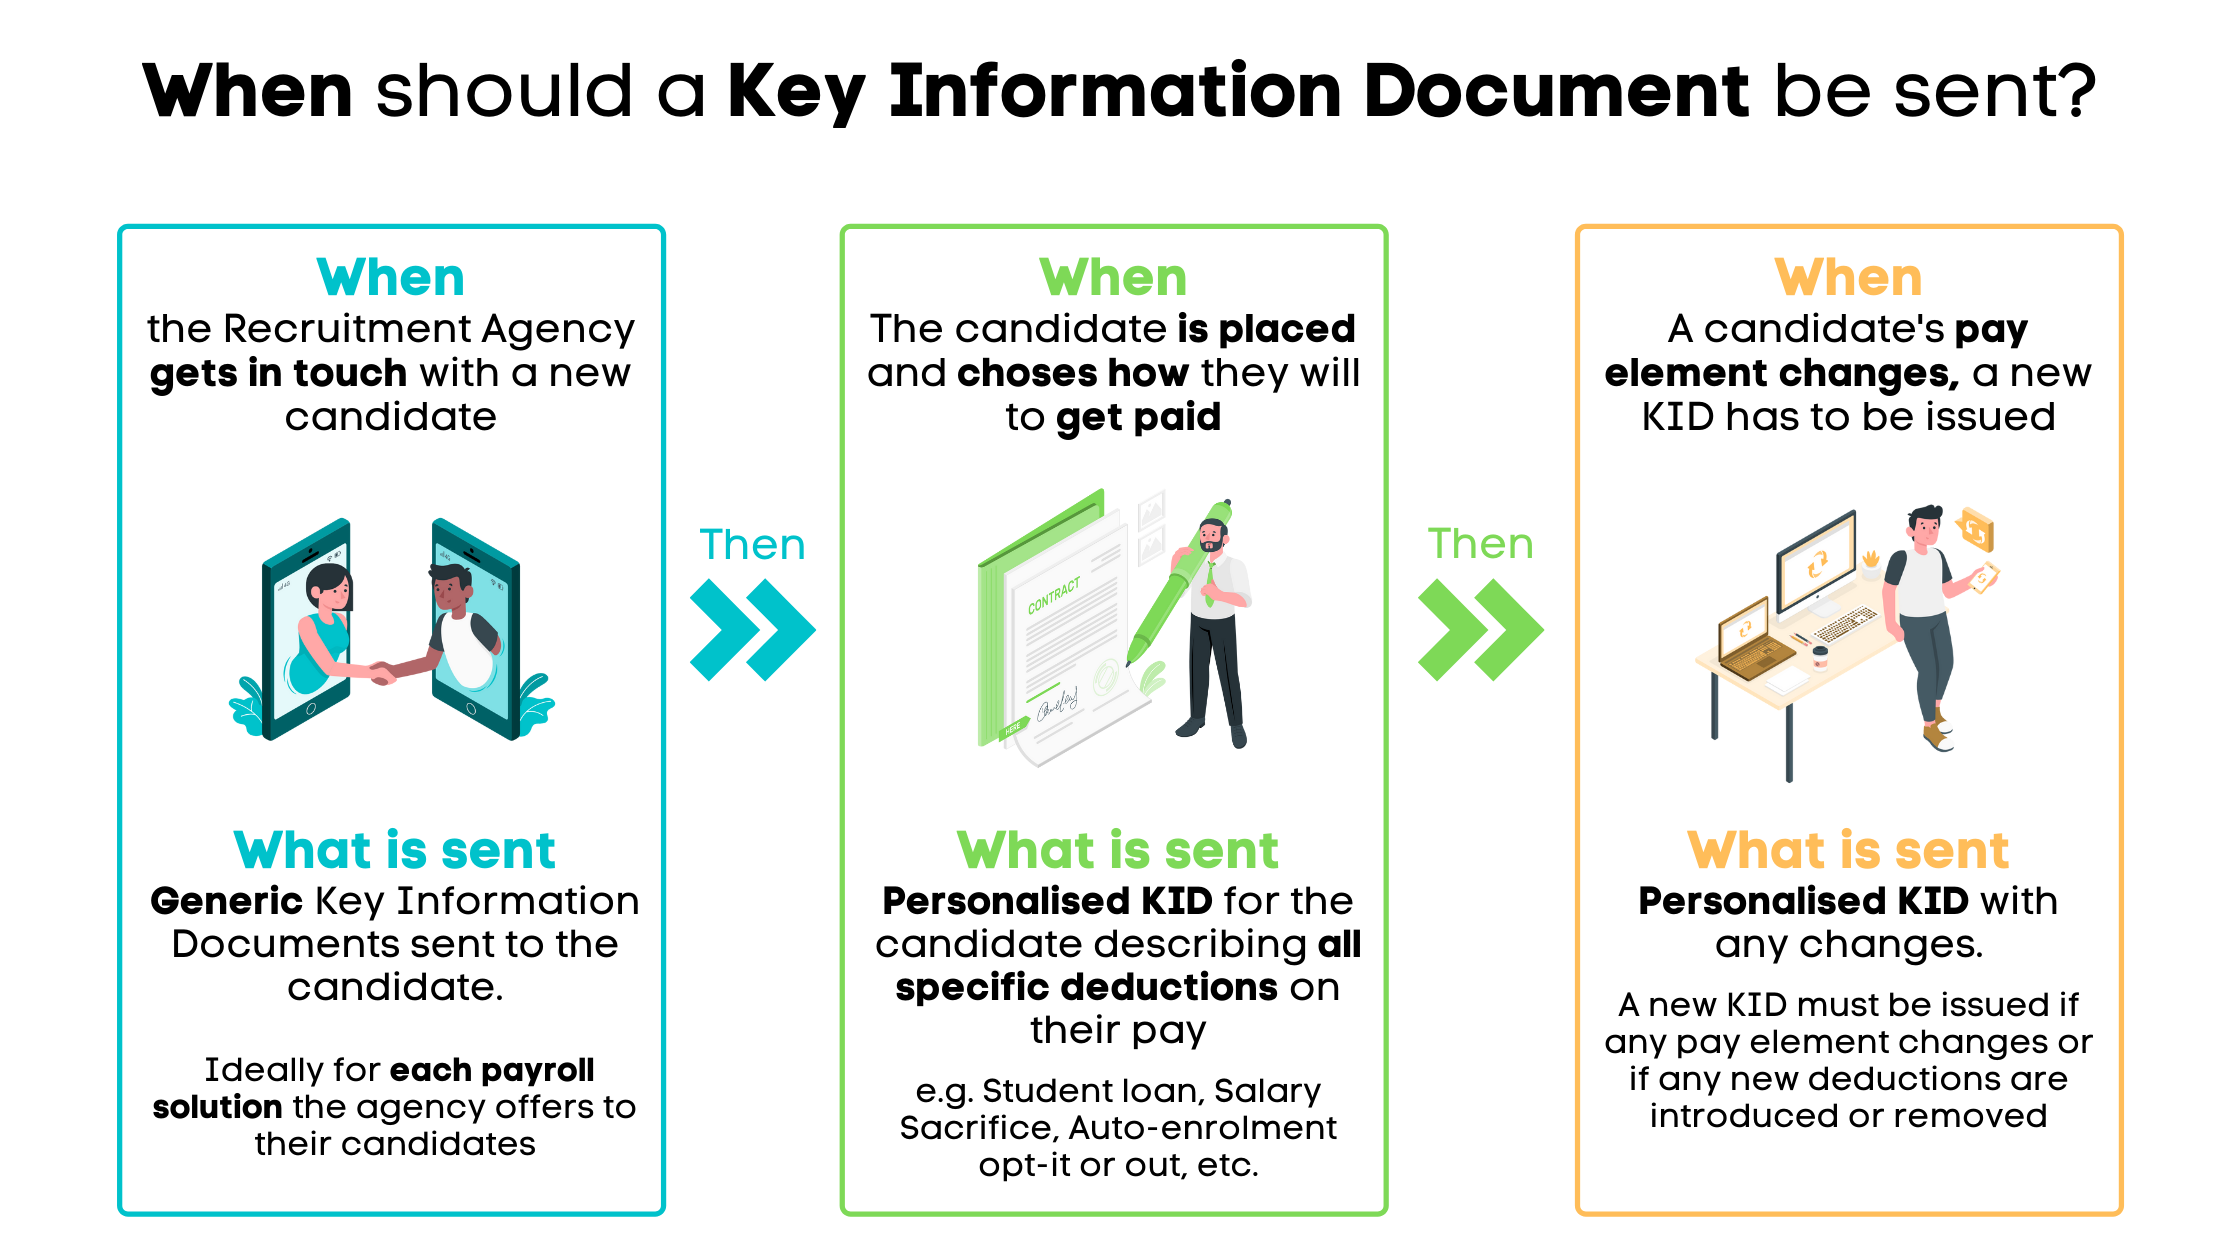 When should a Key Information Document be sent?